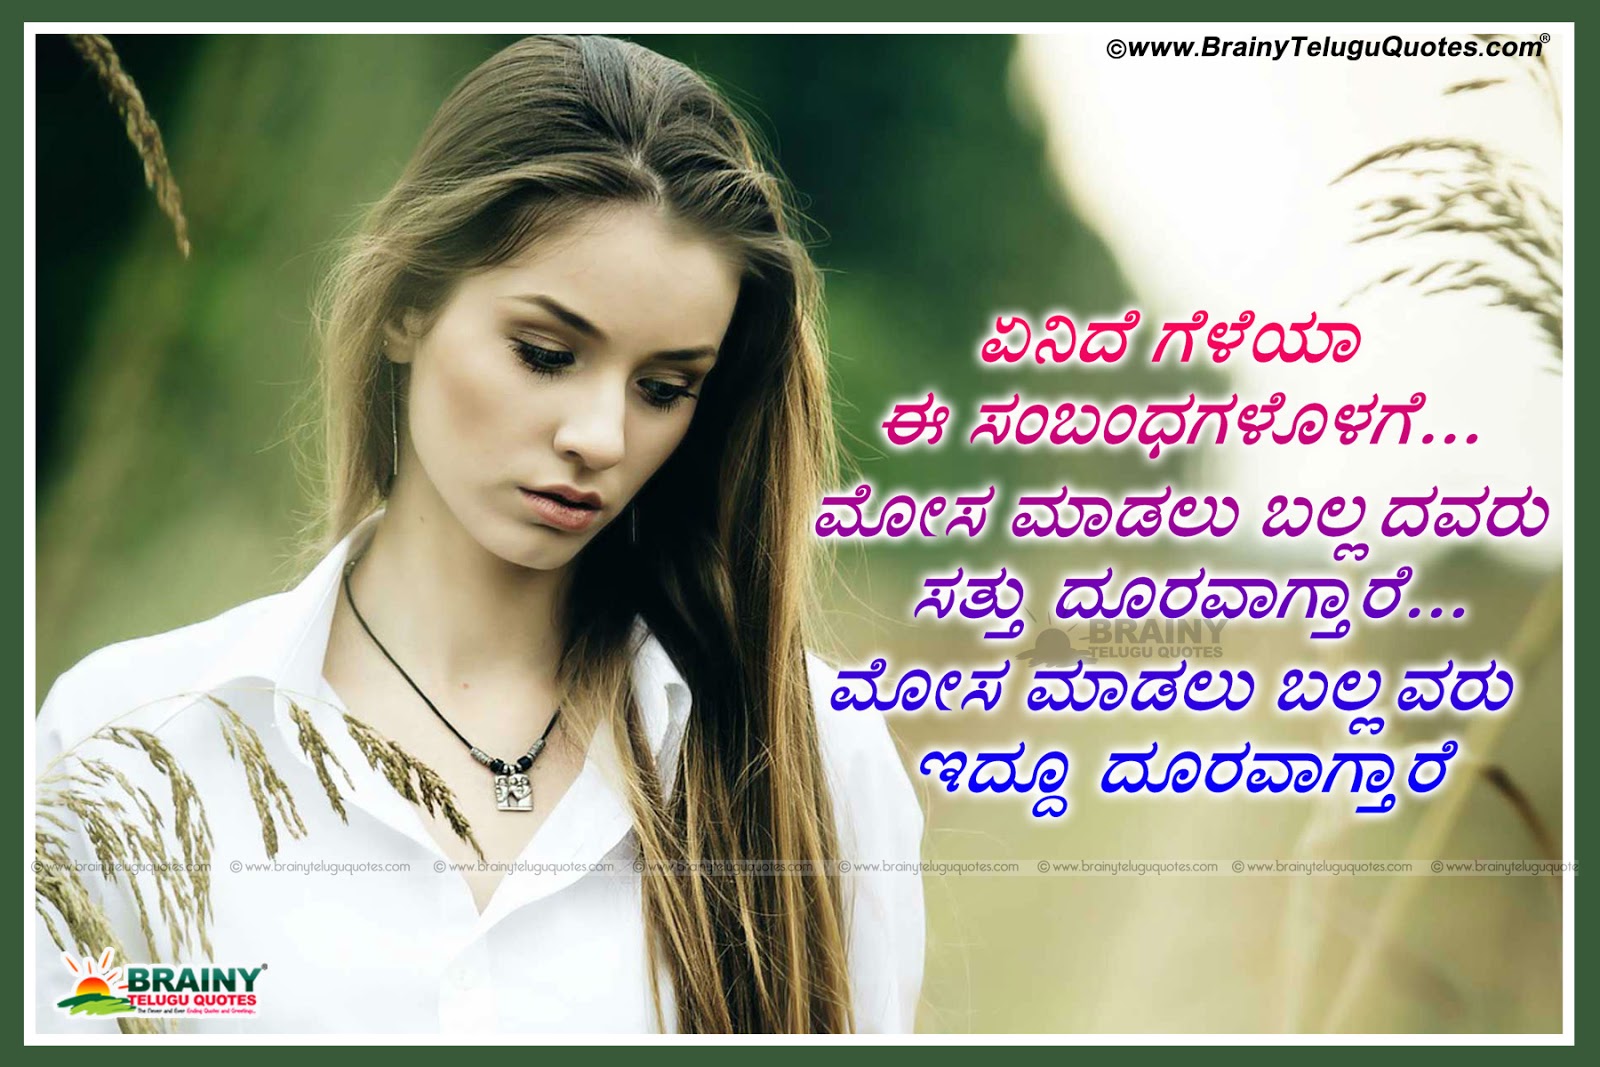 Kannada Love Status Messages For Whats App Kannada Love Failure Images For Girl In Kannada